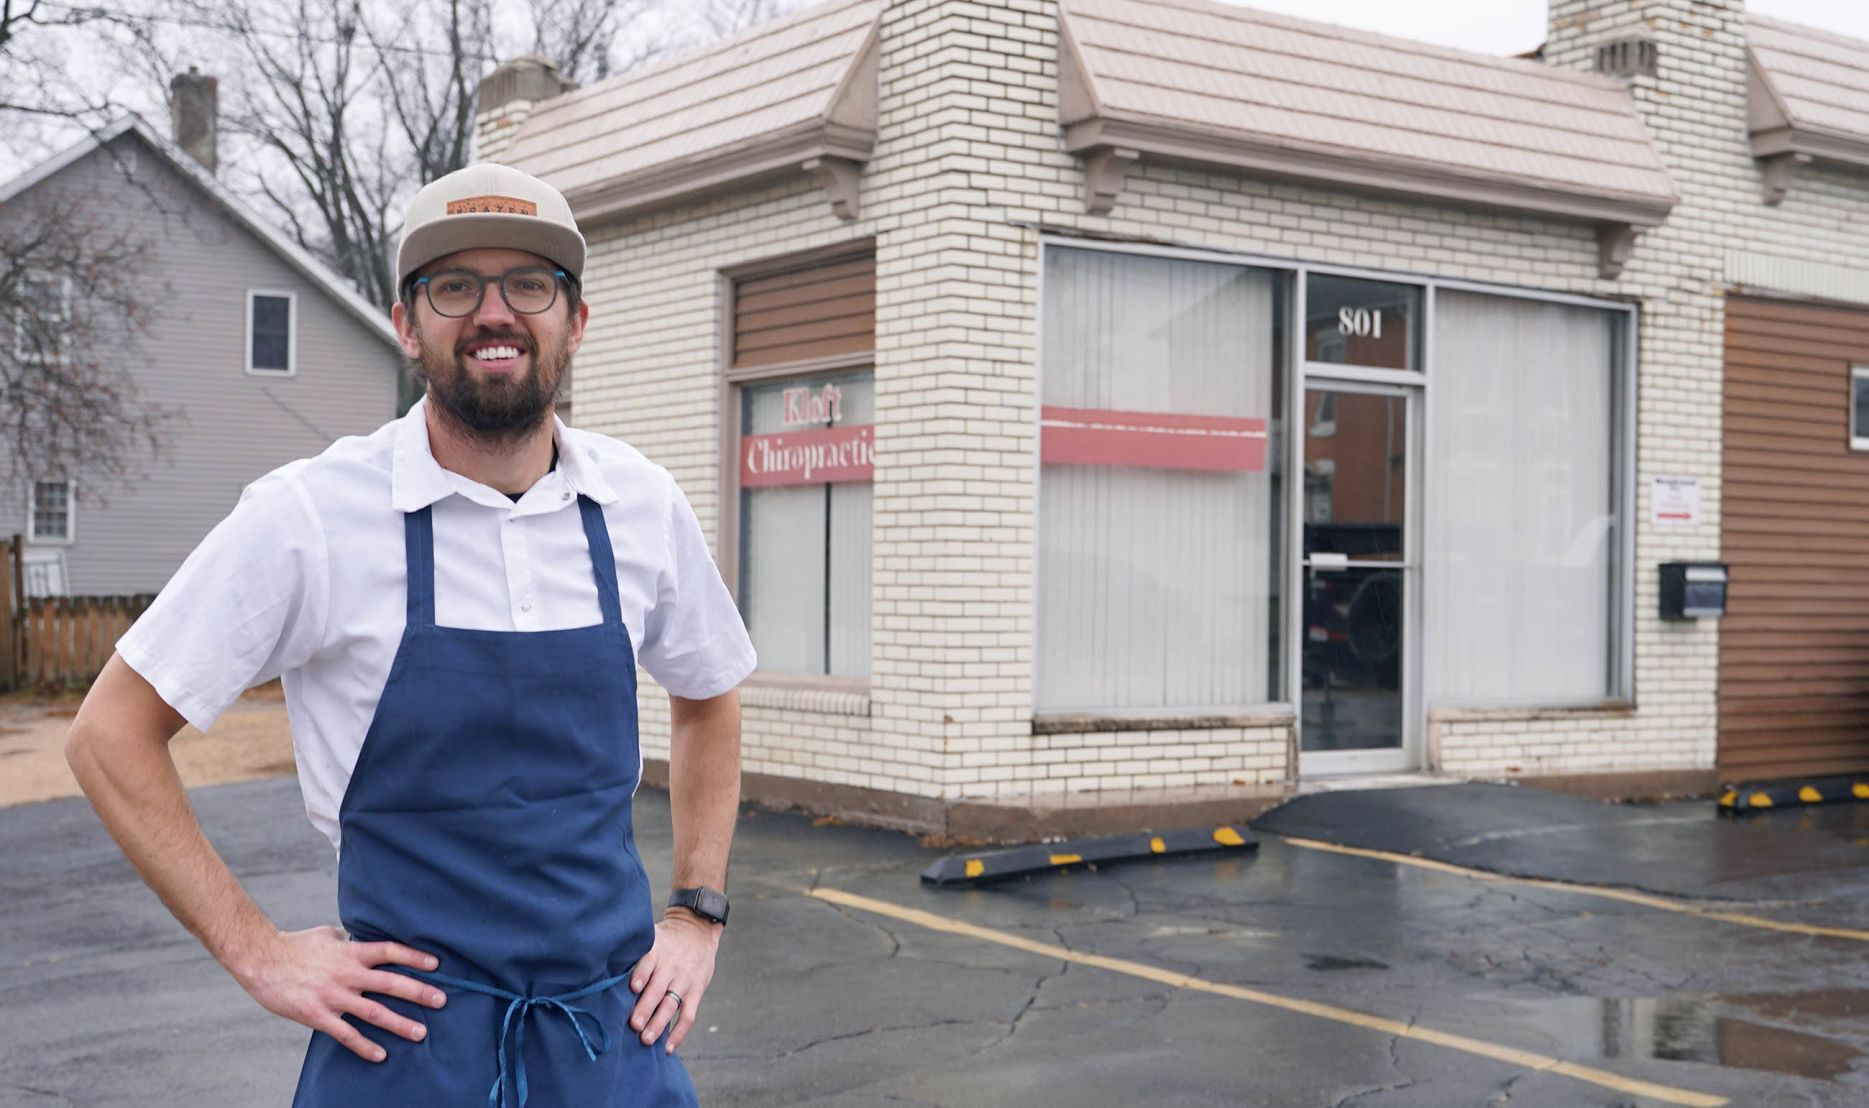 Kevin Scharpf, the chef and owner of Brazen Open Kitchen + Bar in Dubuque, stands in front of 801 Rhomberg Ave. in Dubuque, where he plans to open a new restaurant. PHOTO CREDIT: PAUL KURUTSIDES